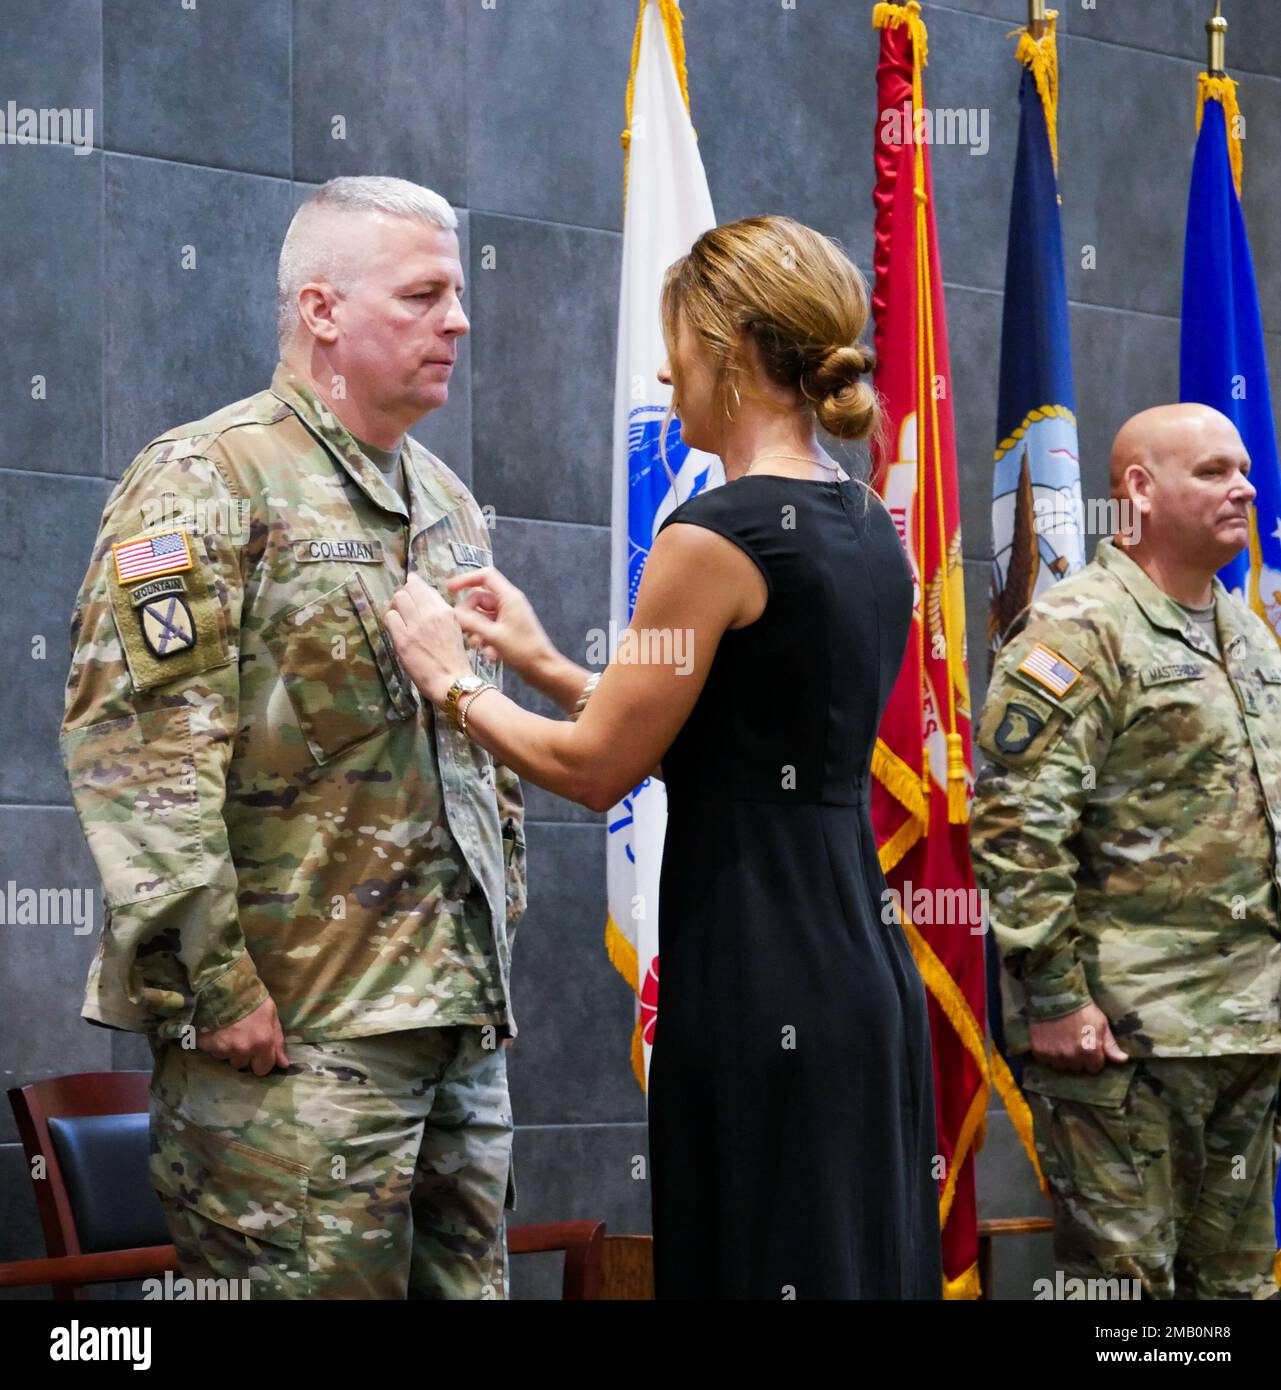 Command Sgt. Maj. Jonathan B. Coleman, incoming land component command sergeant major of the Mississippi National Guard, is pinned the rank of command sergeant major by his wife, Fran Coleman, during a change of responsibility ceremony in the Mississippi Armed Forces Museum’s Grand Gallery, Camp Shelby Joint Forces Training Center, Mississippi, June 9, 2022. Stock Photo